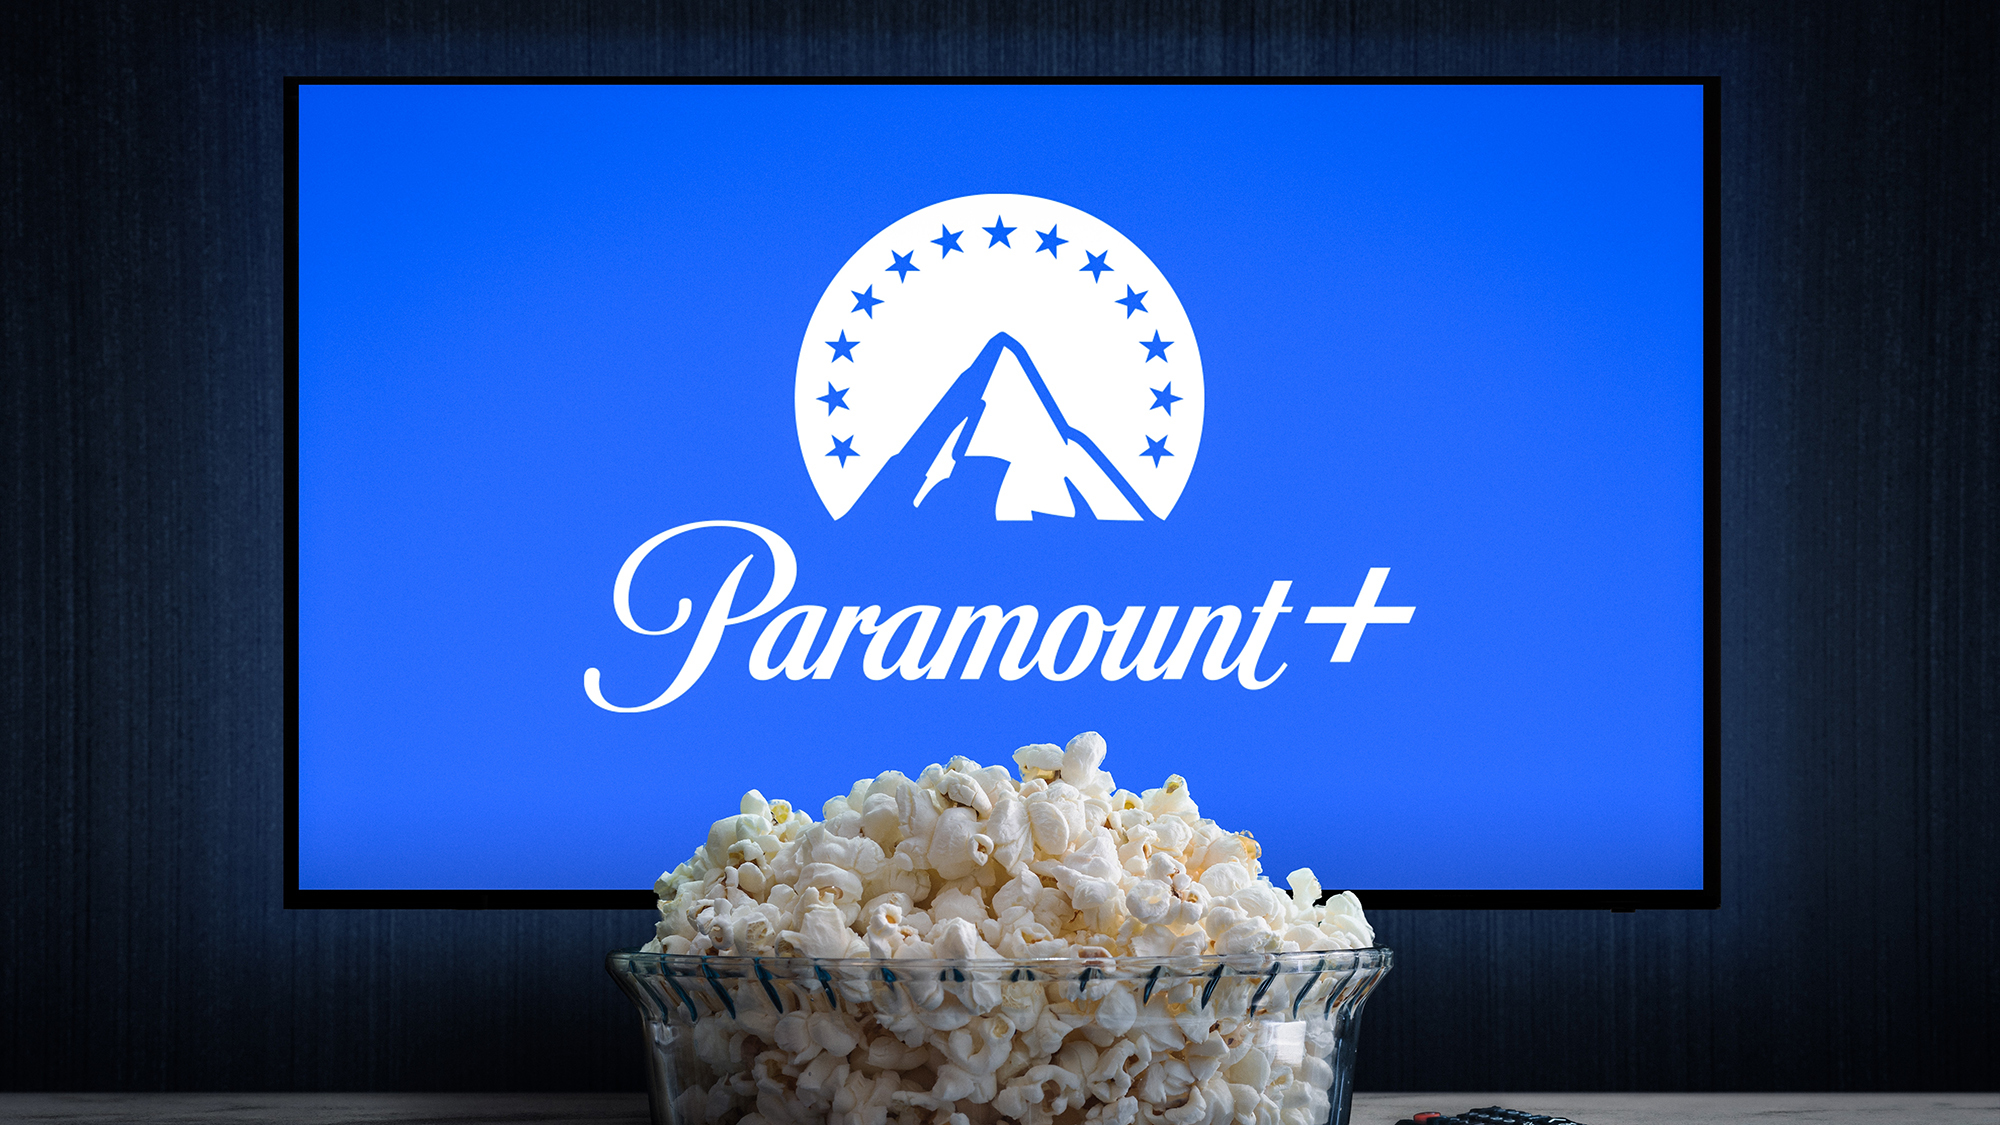 Big Change for Binge-Watchers: Showtime Streaming Service to Close, Shifts Focus to Paramount Plus This Spring